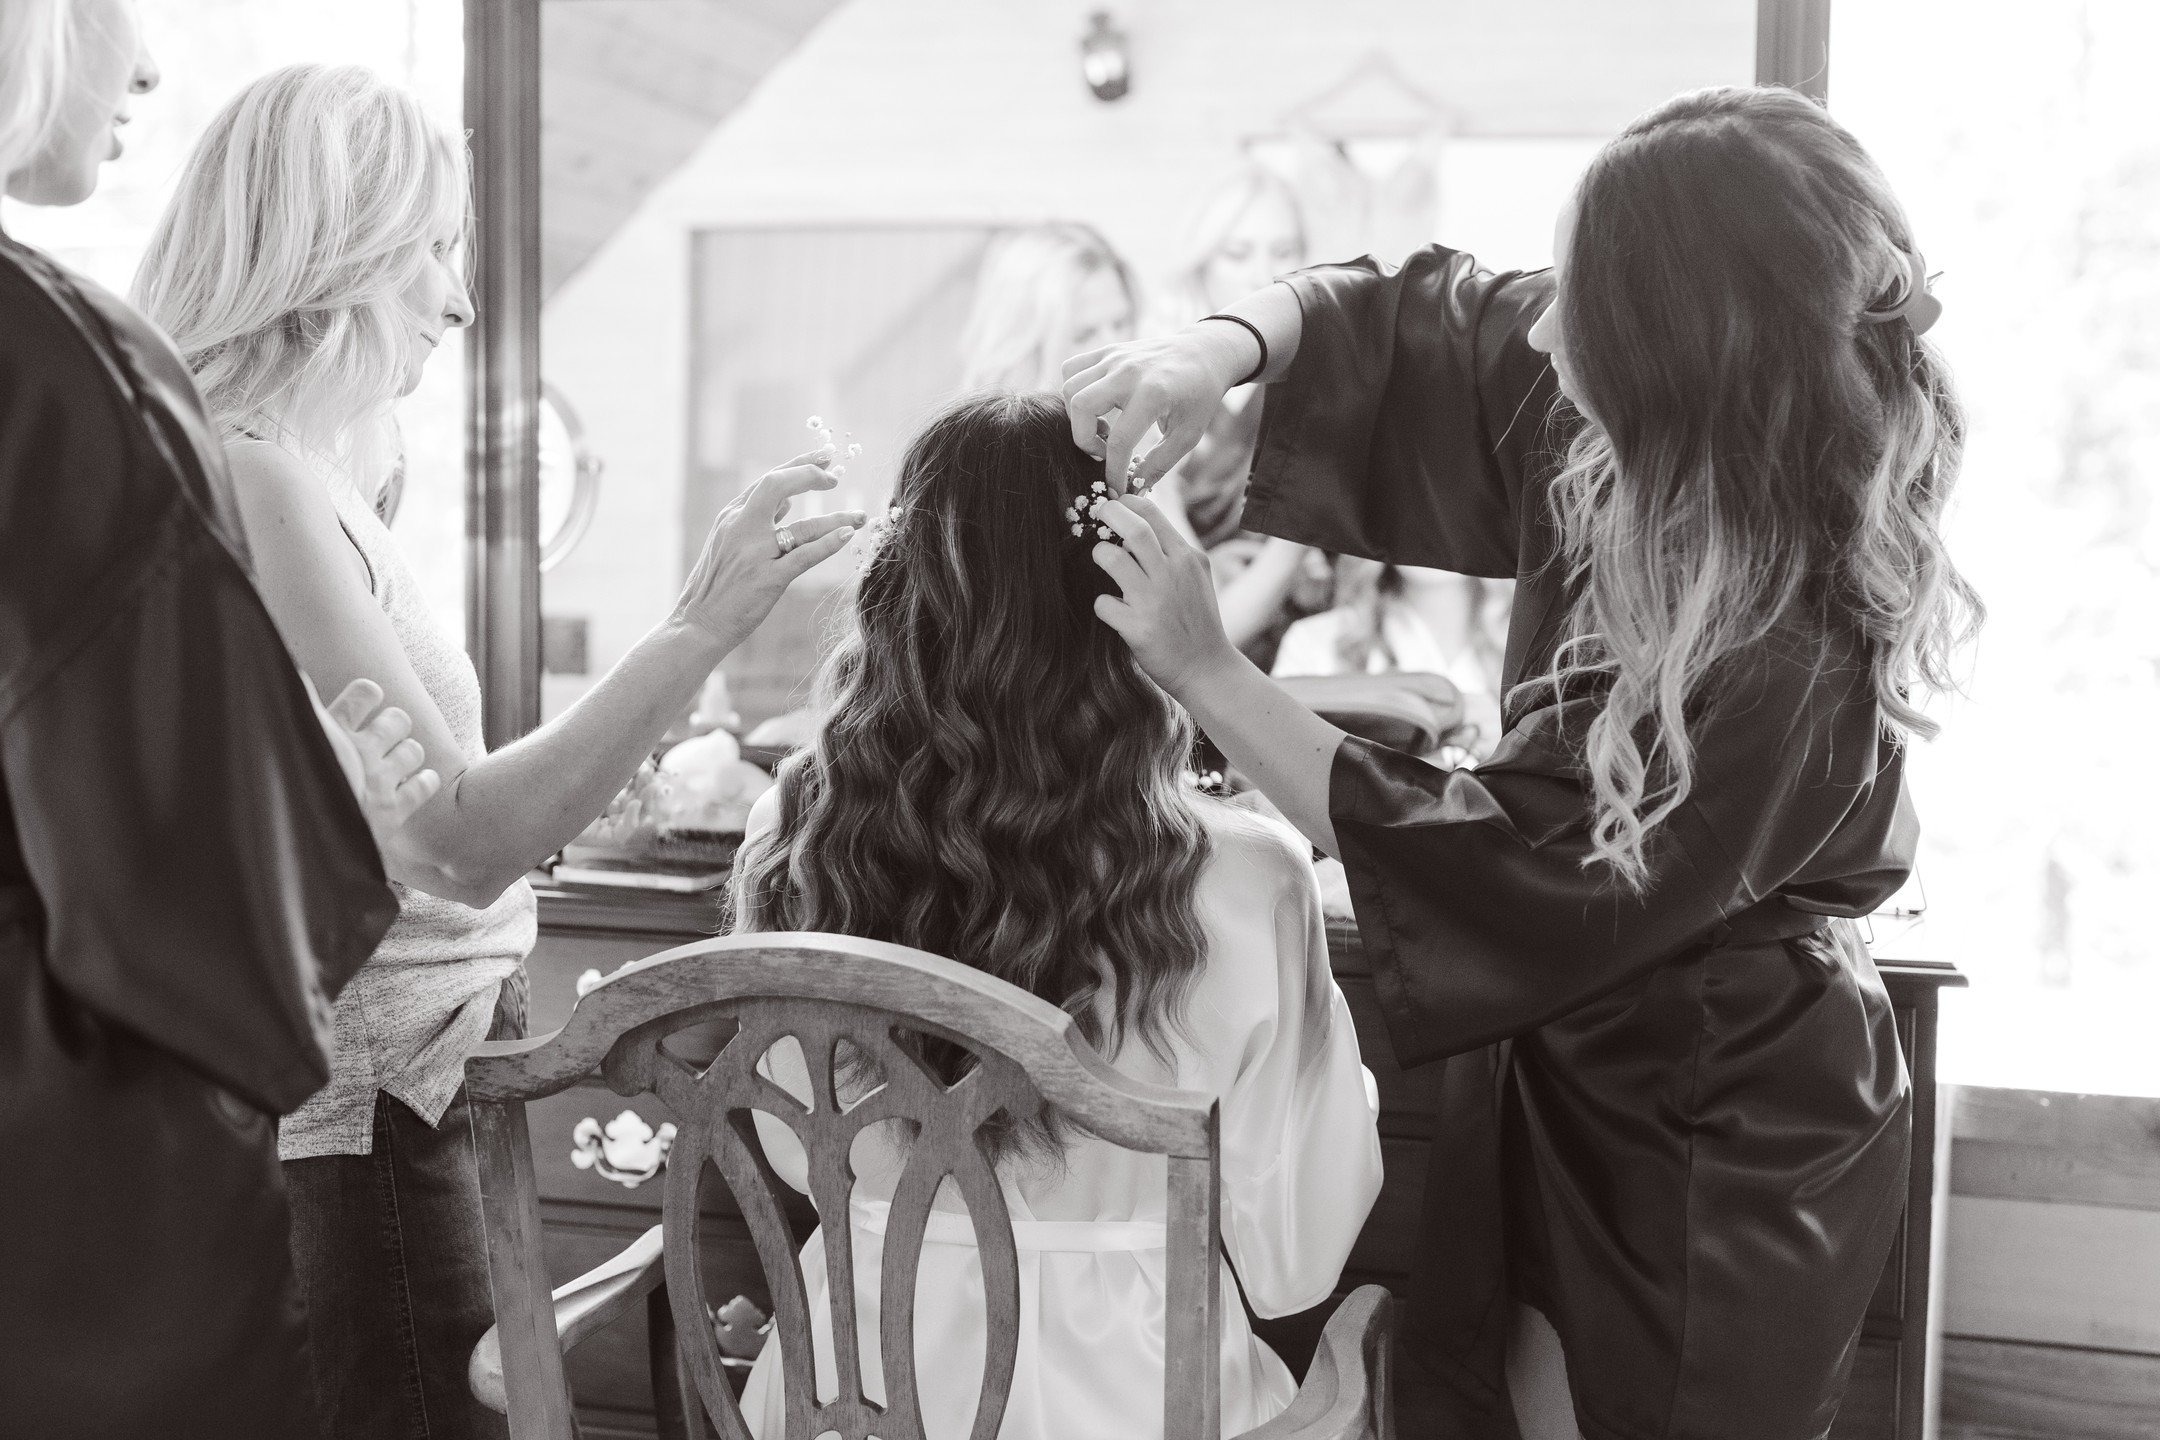 Behind the scenes. Surrounded by love, our beautiful bride shines brightest with her friends and family by her side.

#brideprep #bridelove #beautifulbride #bride #bridesmaids